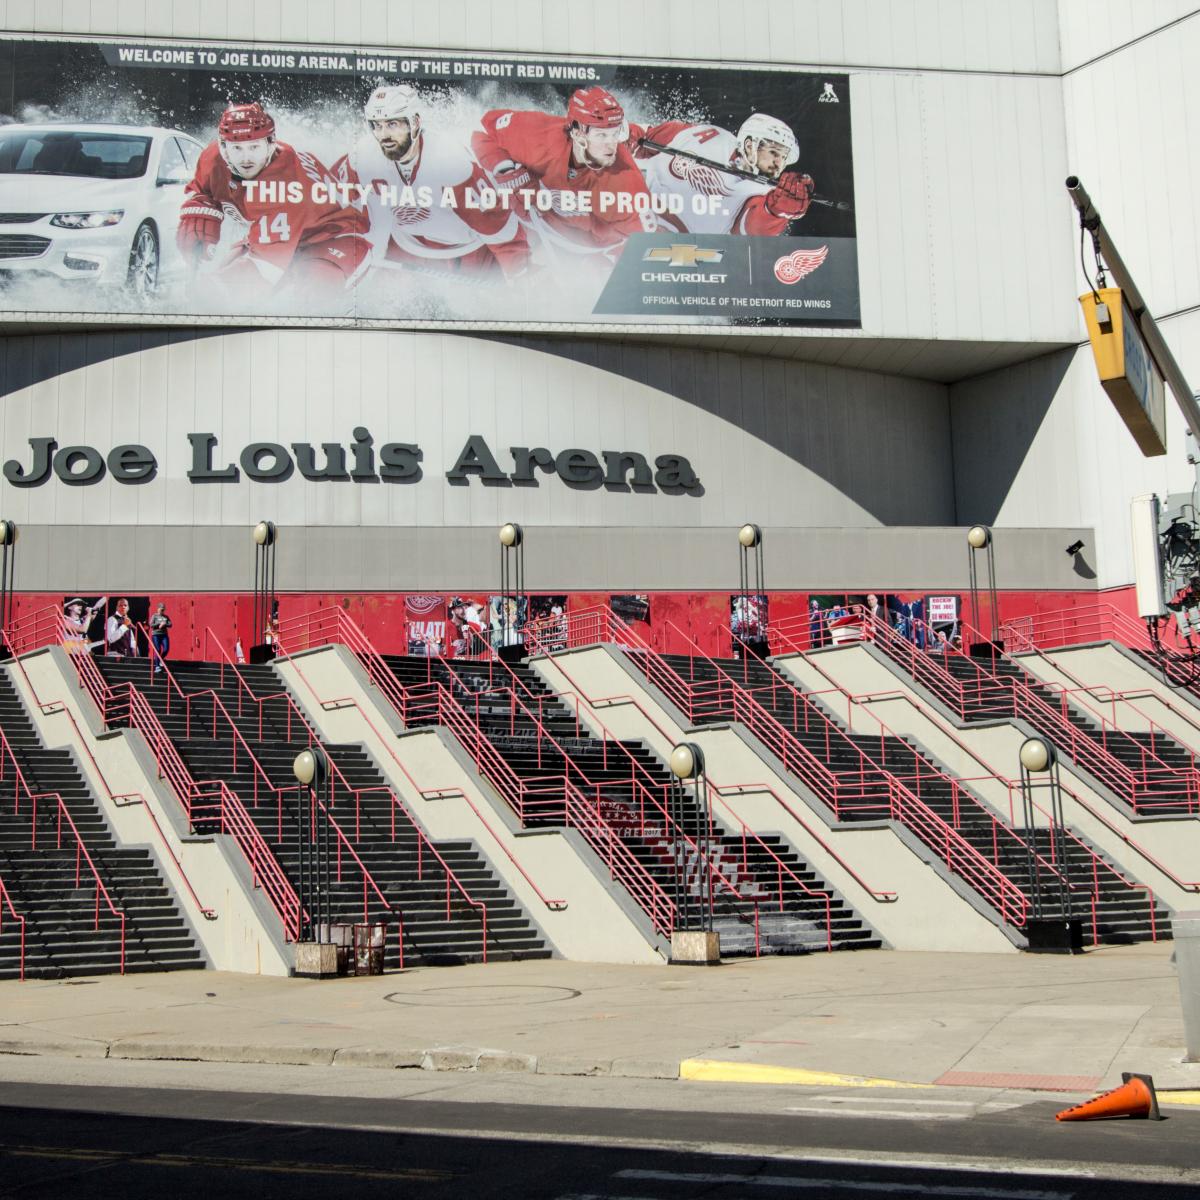 500 apartments proposed for former Joe Louis Arena site